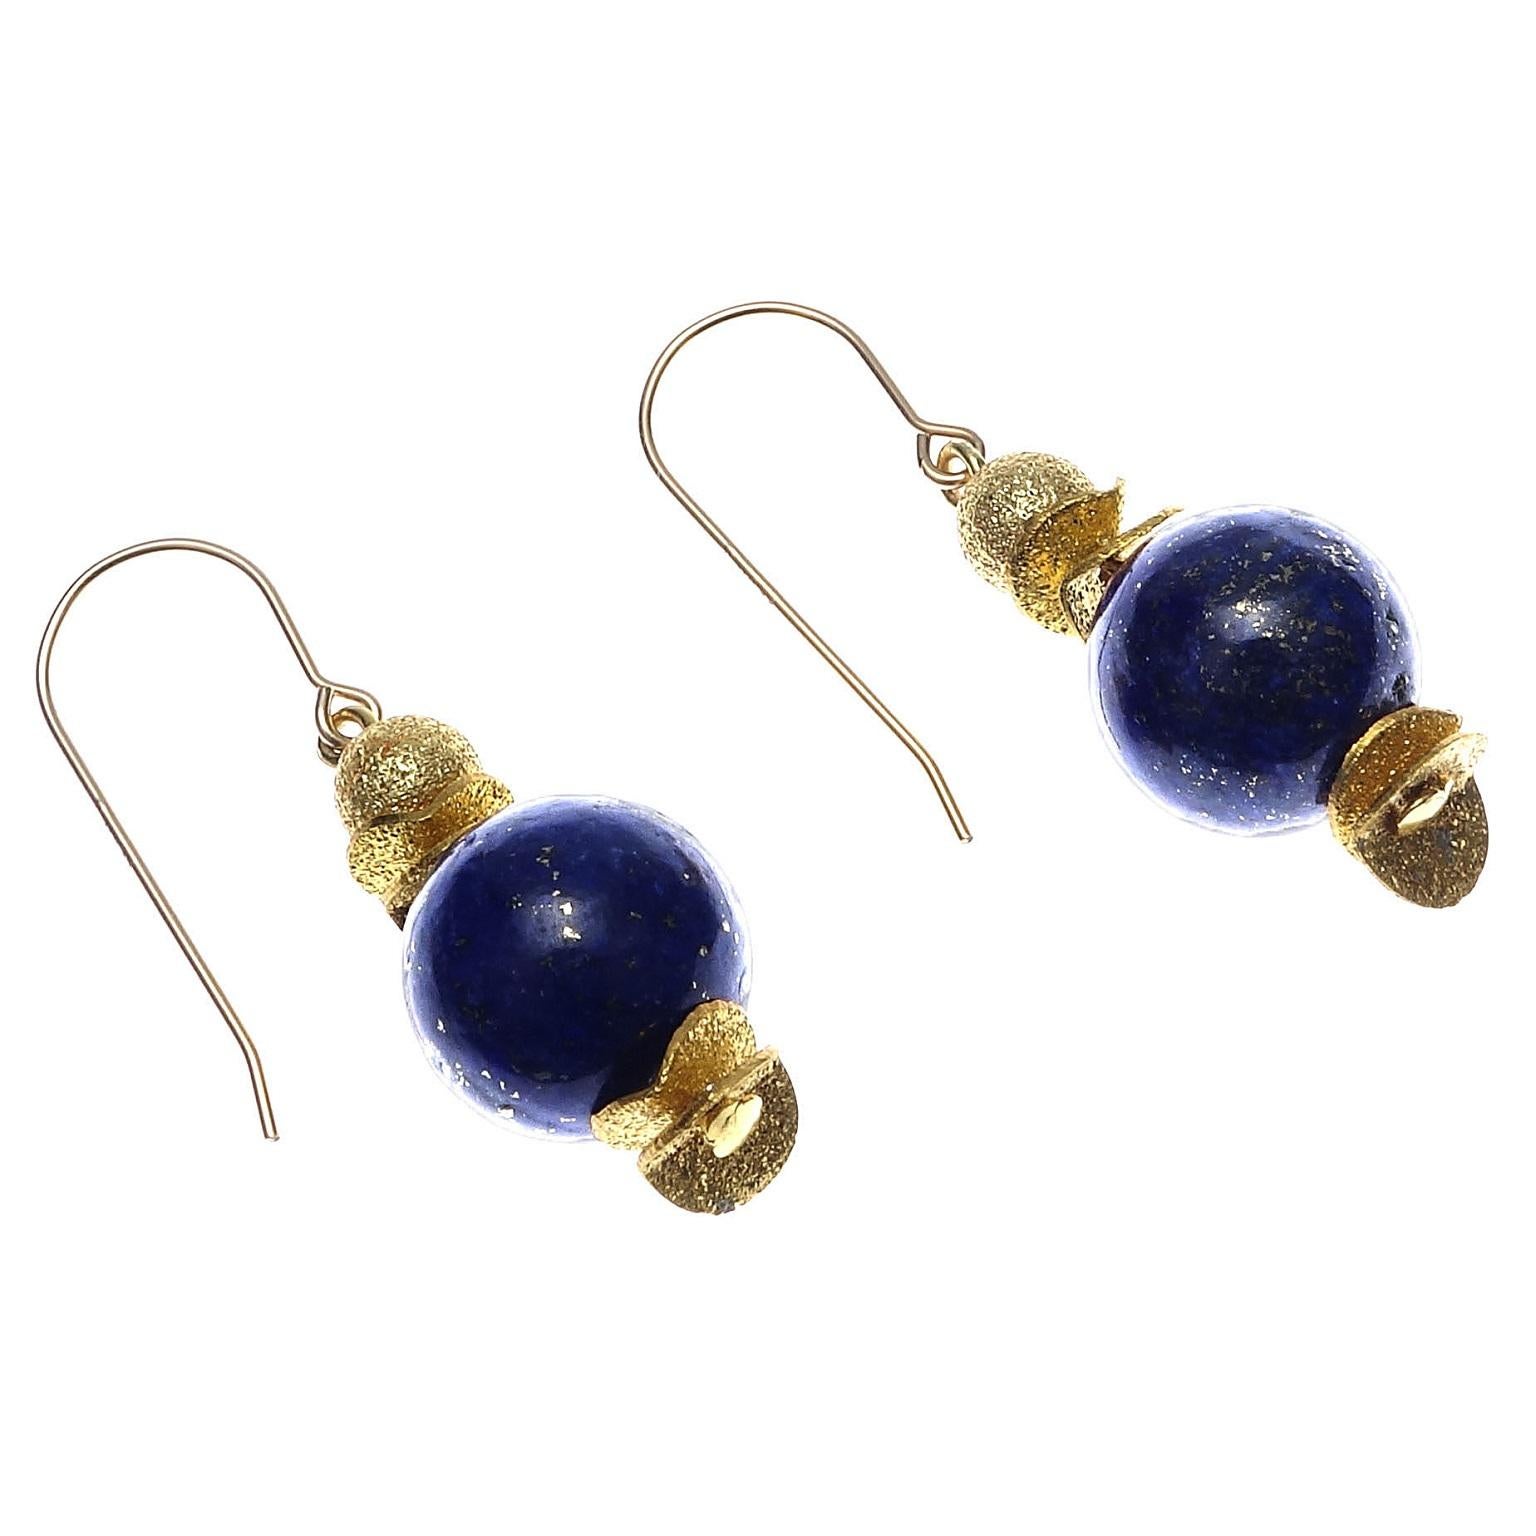 Lapis Lazuli Earrings with Gold French hooks